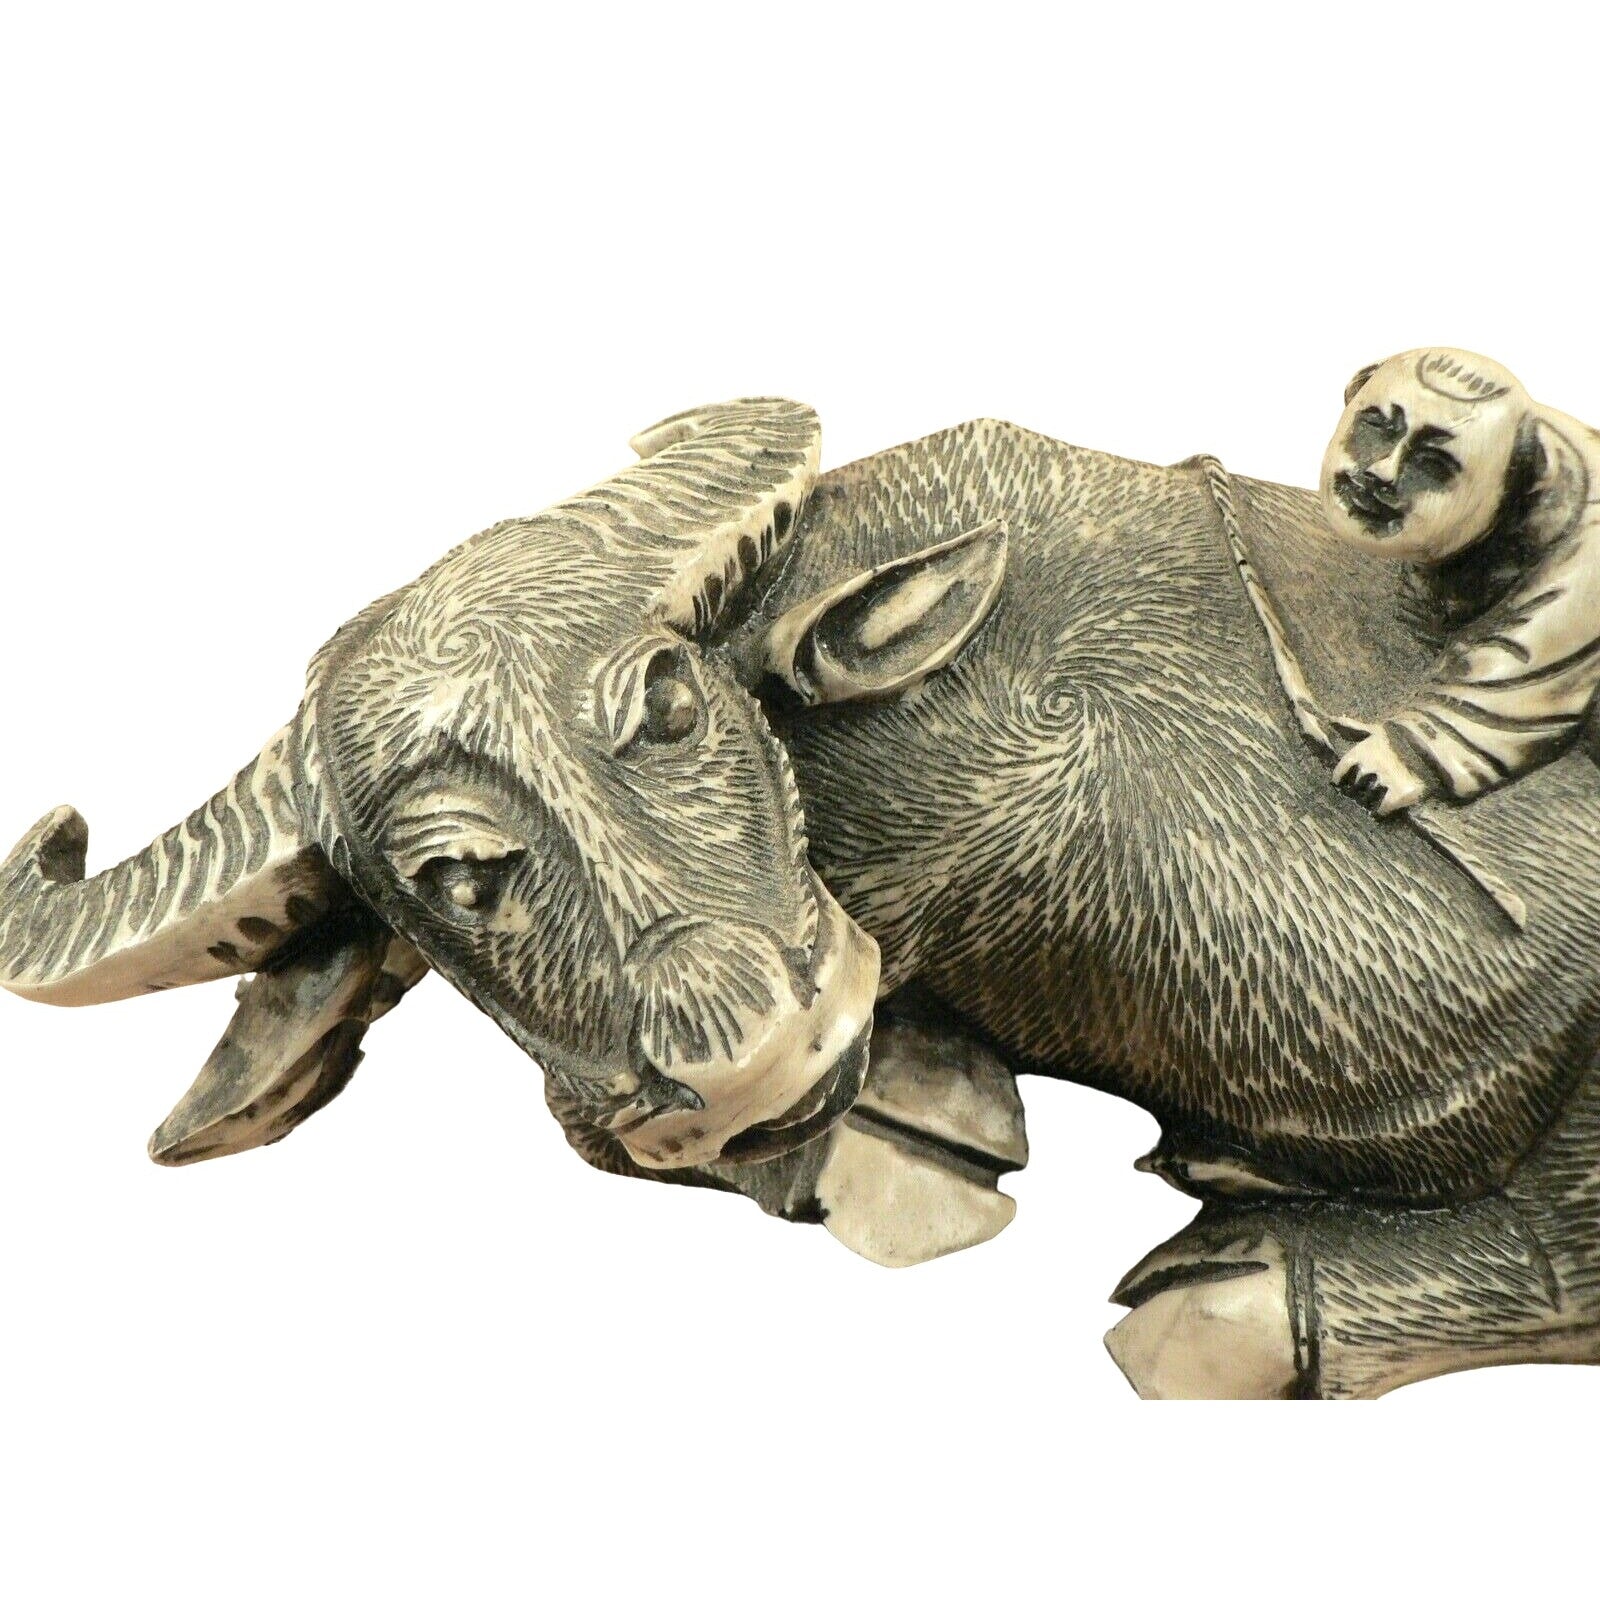 Asian style Oxen man decorative sculpture figurine etched resin